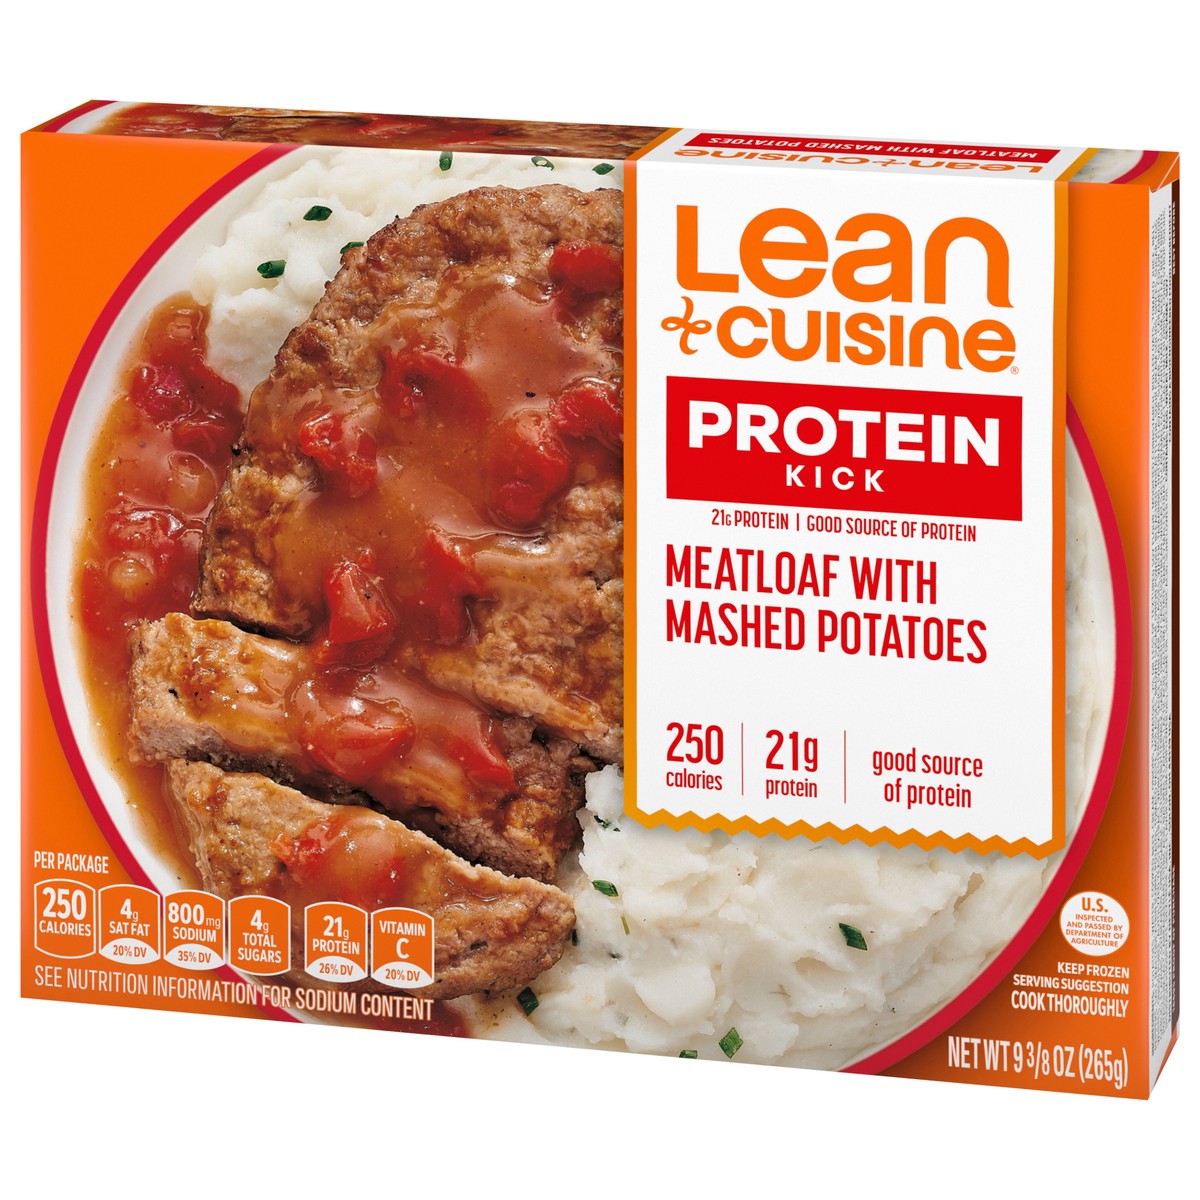 slide 5 of 14, Lean Cuisine Frozen Meal Meatloaf with Mashed Potatoes, Protein Kick Microwave Meal, Meatloaf Dinner, Frozen Dinner for One, 9.38 oz